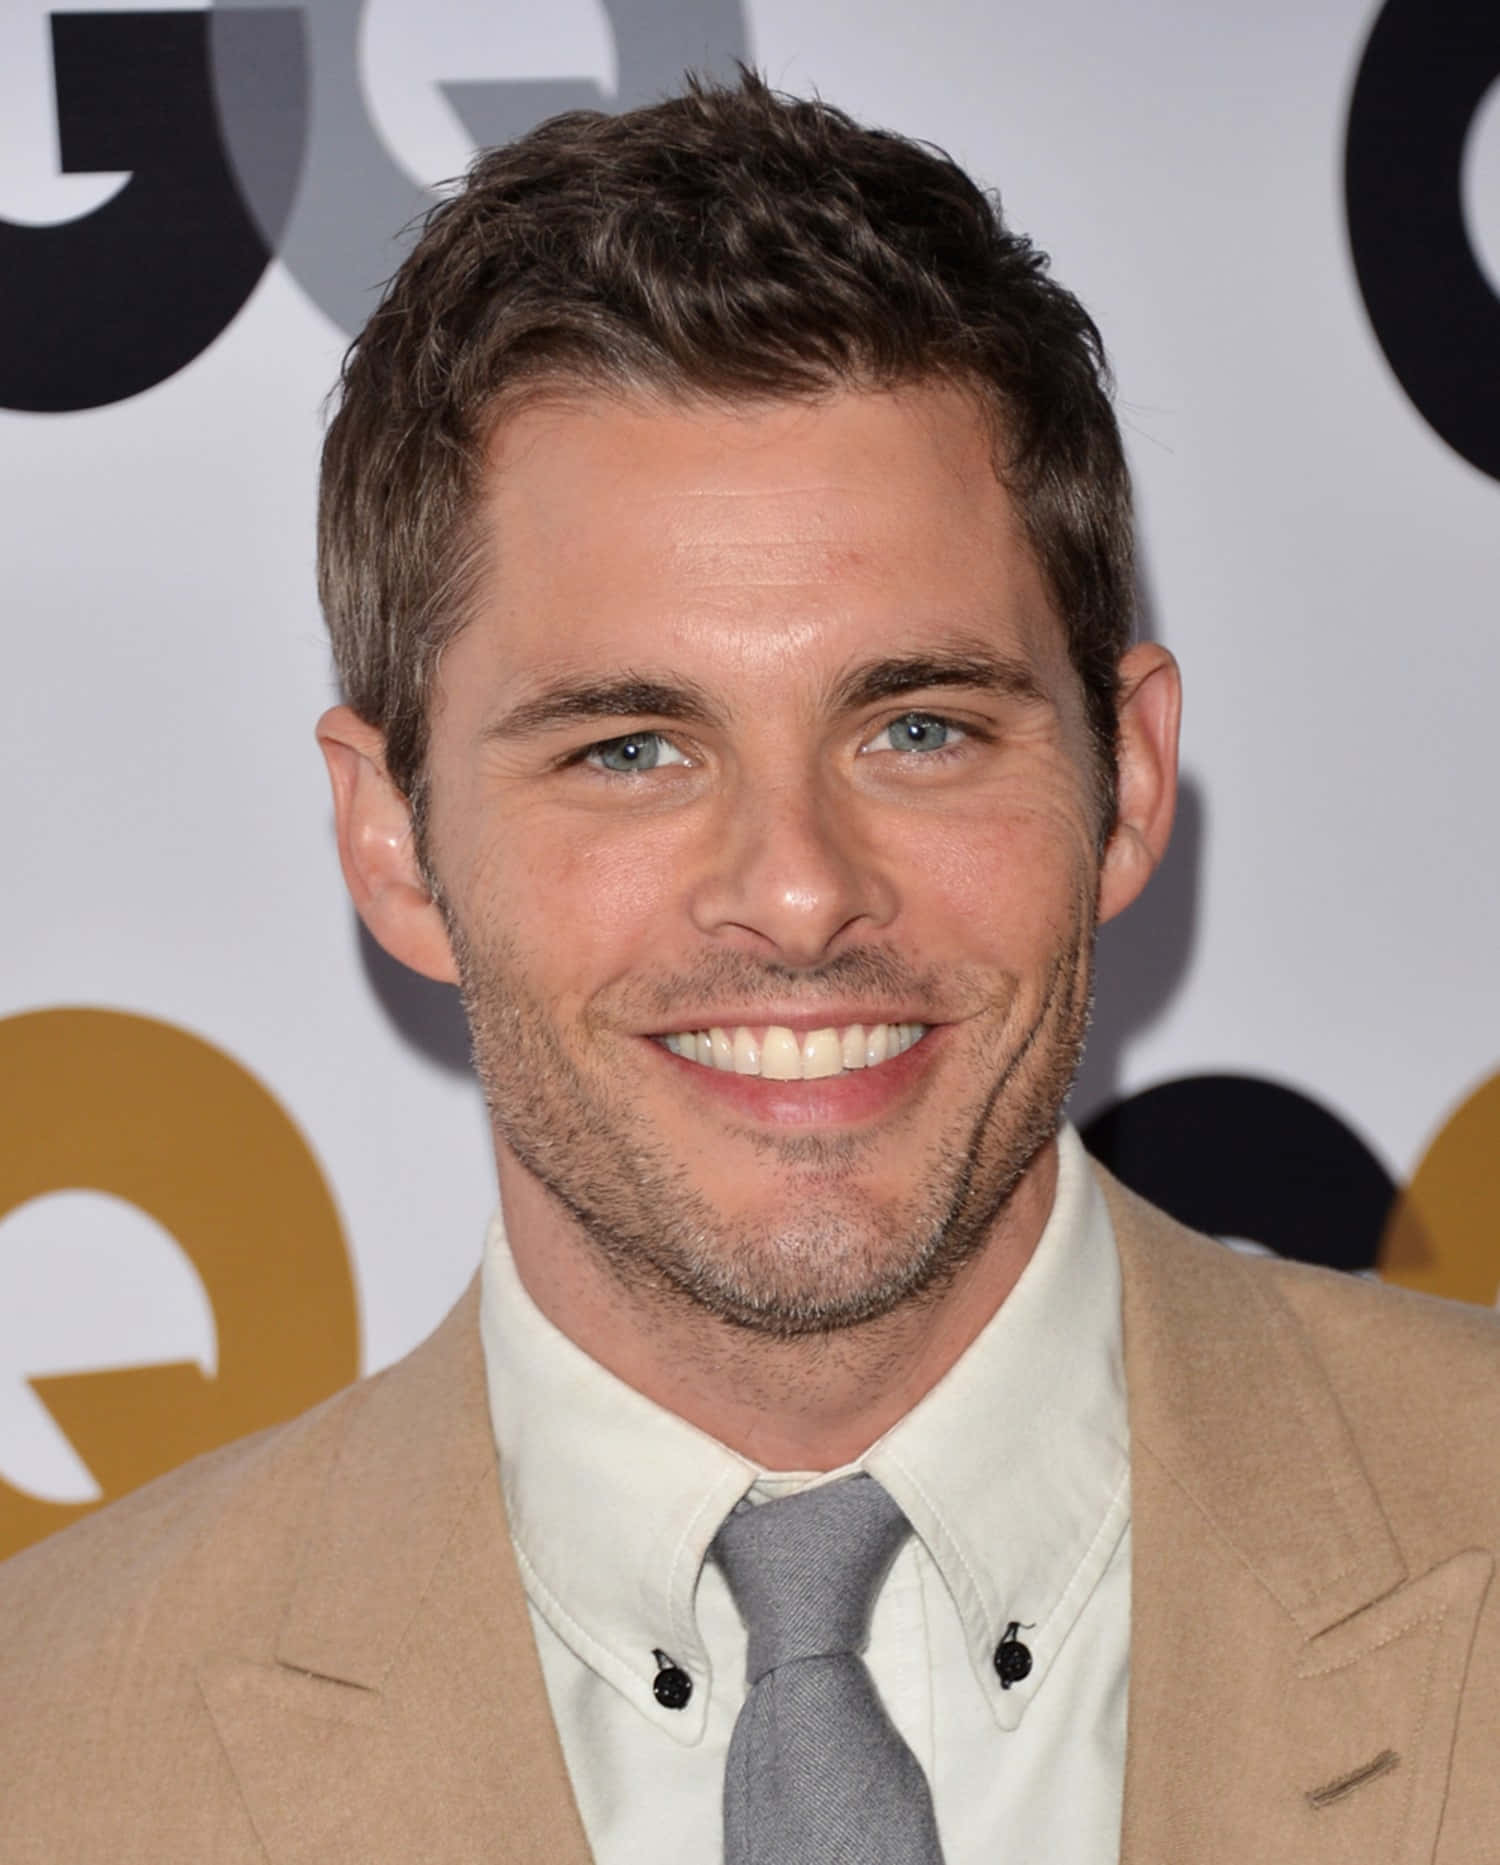 Jamesmarsden Is An American Actor Who Has Appeared In Various Movies And Tv Shows. He Is Known For His Roles In Films Like 